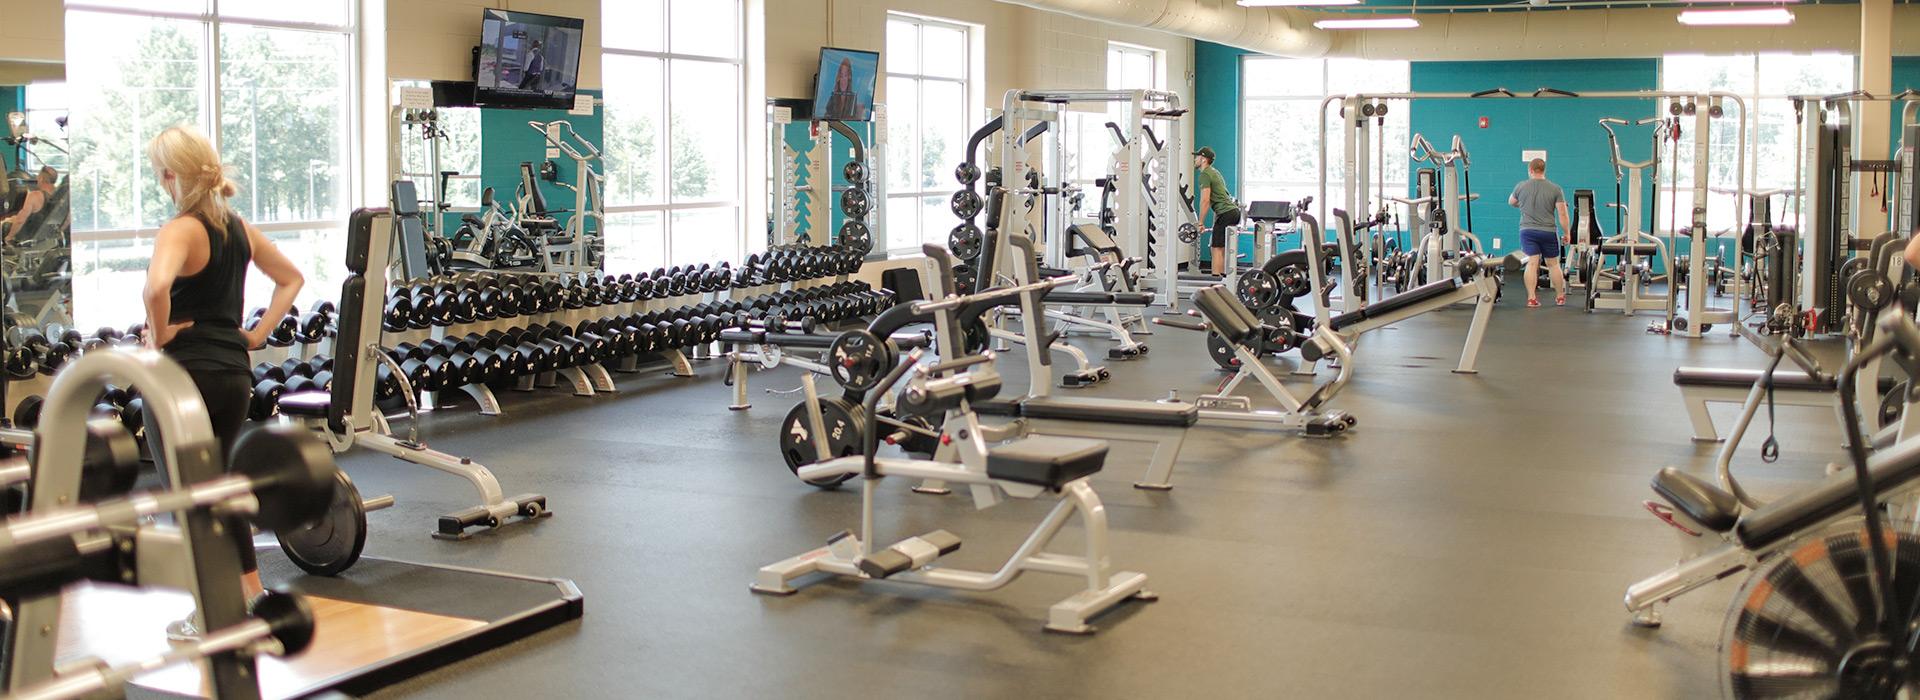 Free weight area in the wellness center at the Princess Anne Family YMCA